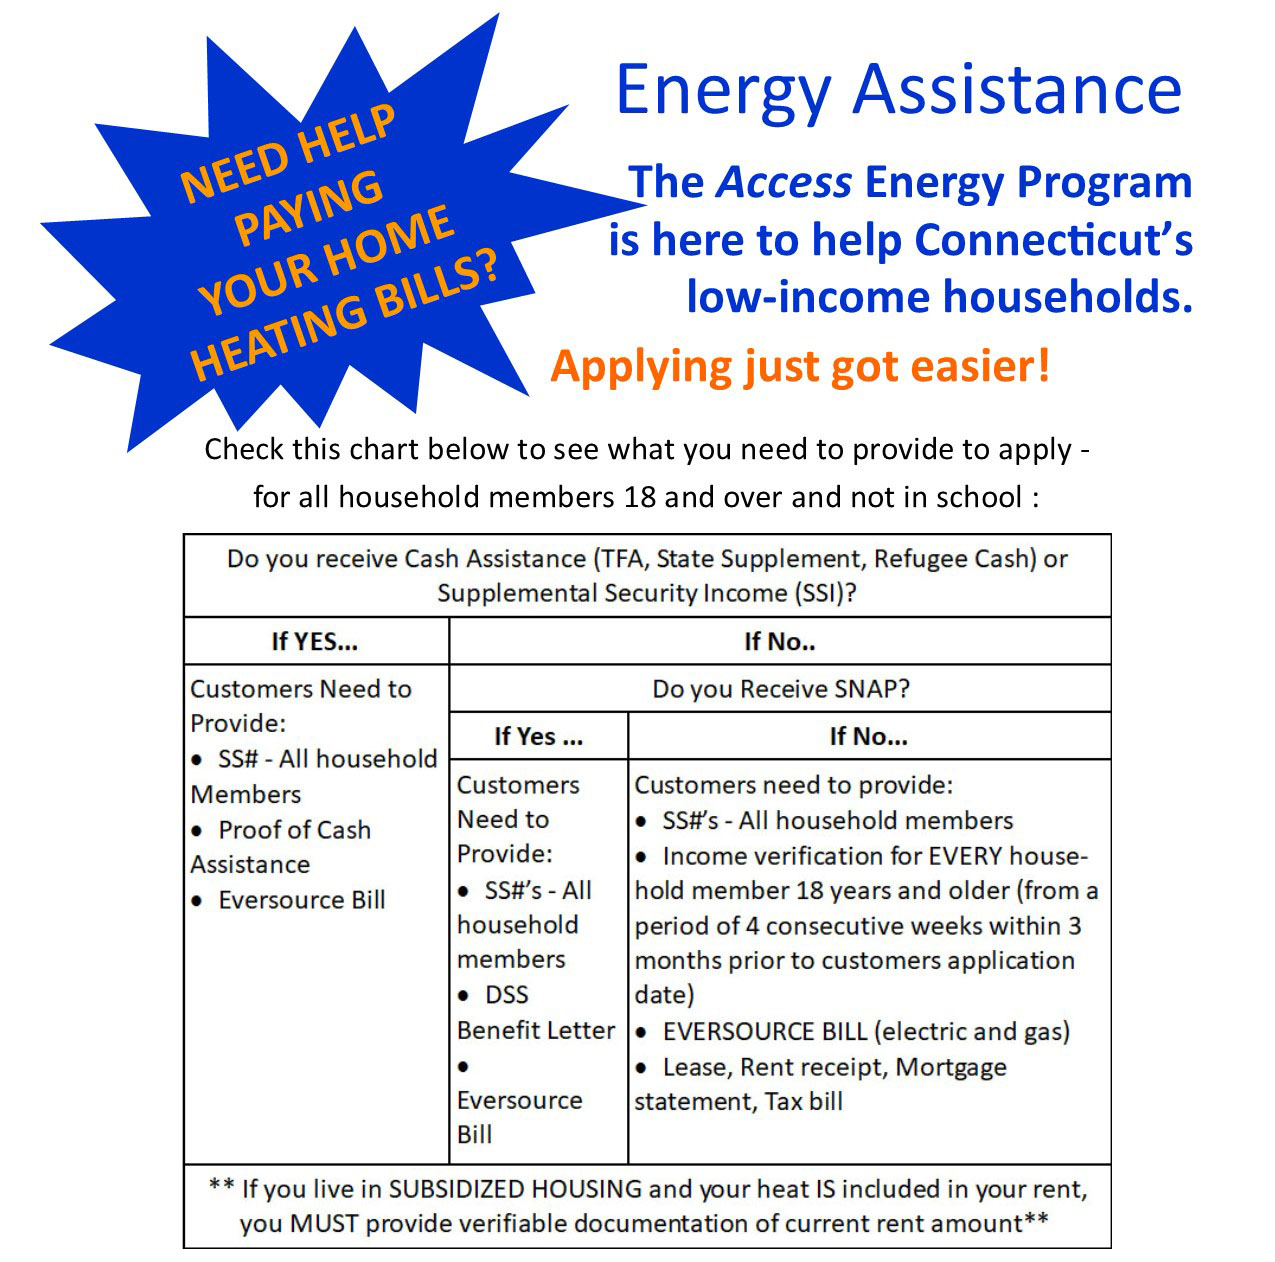 Apply for energy assistance